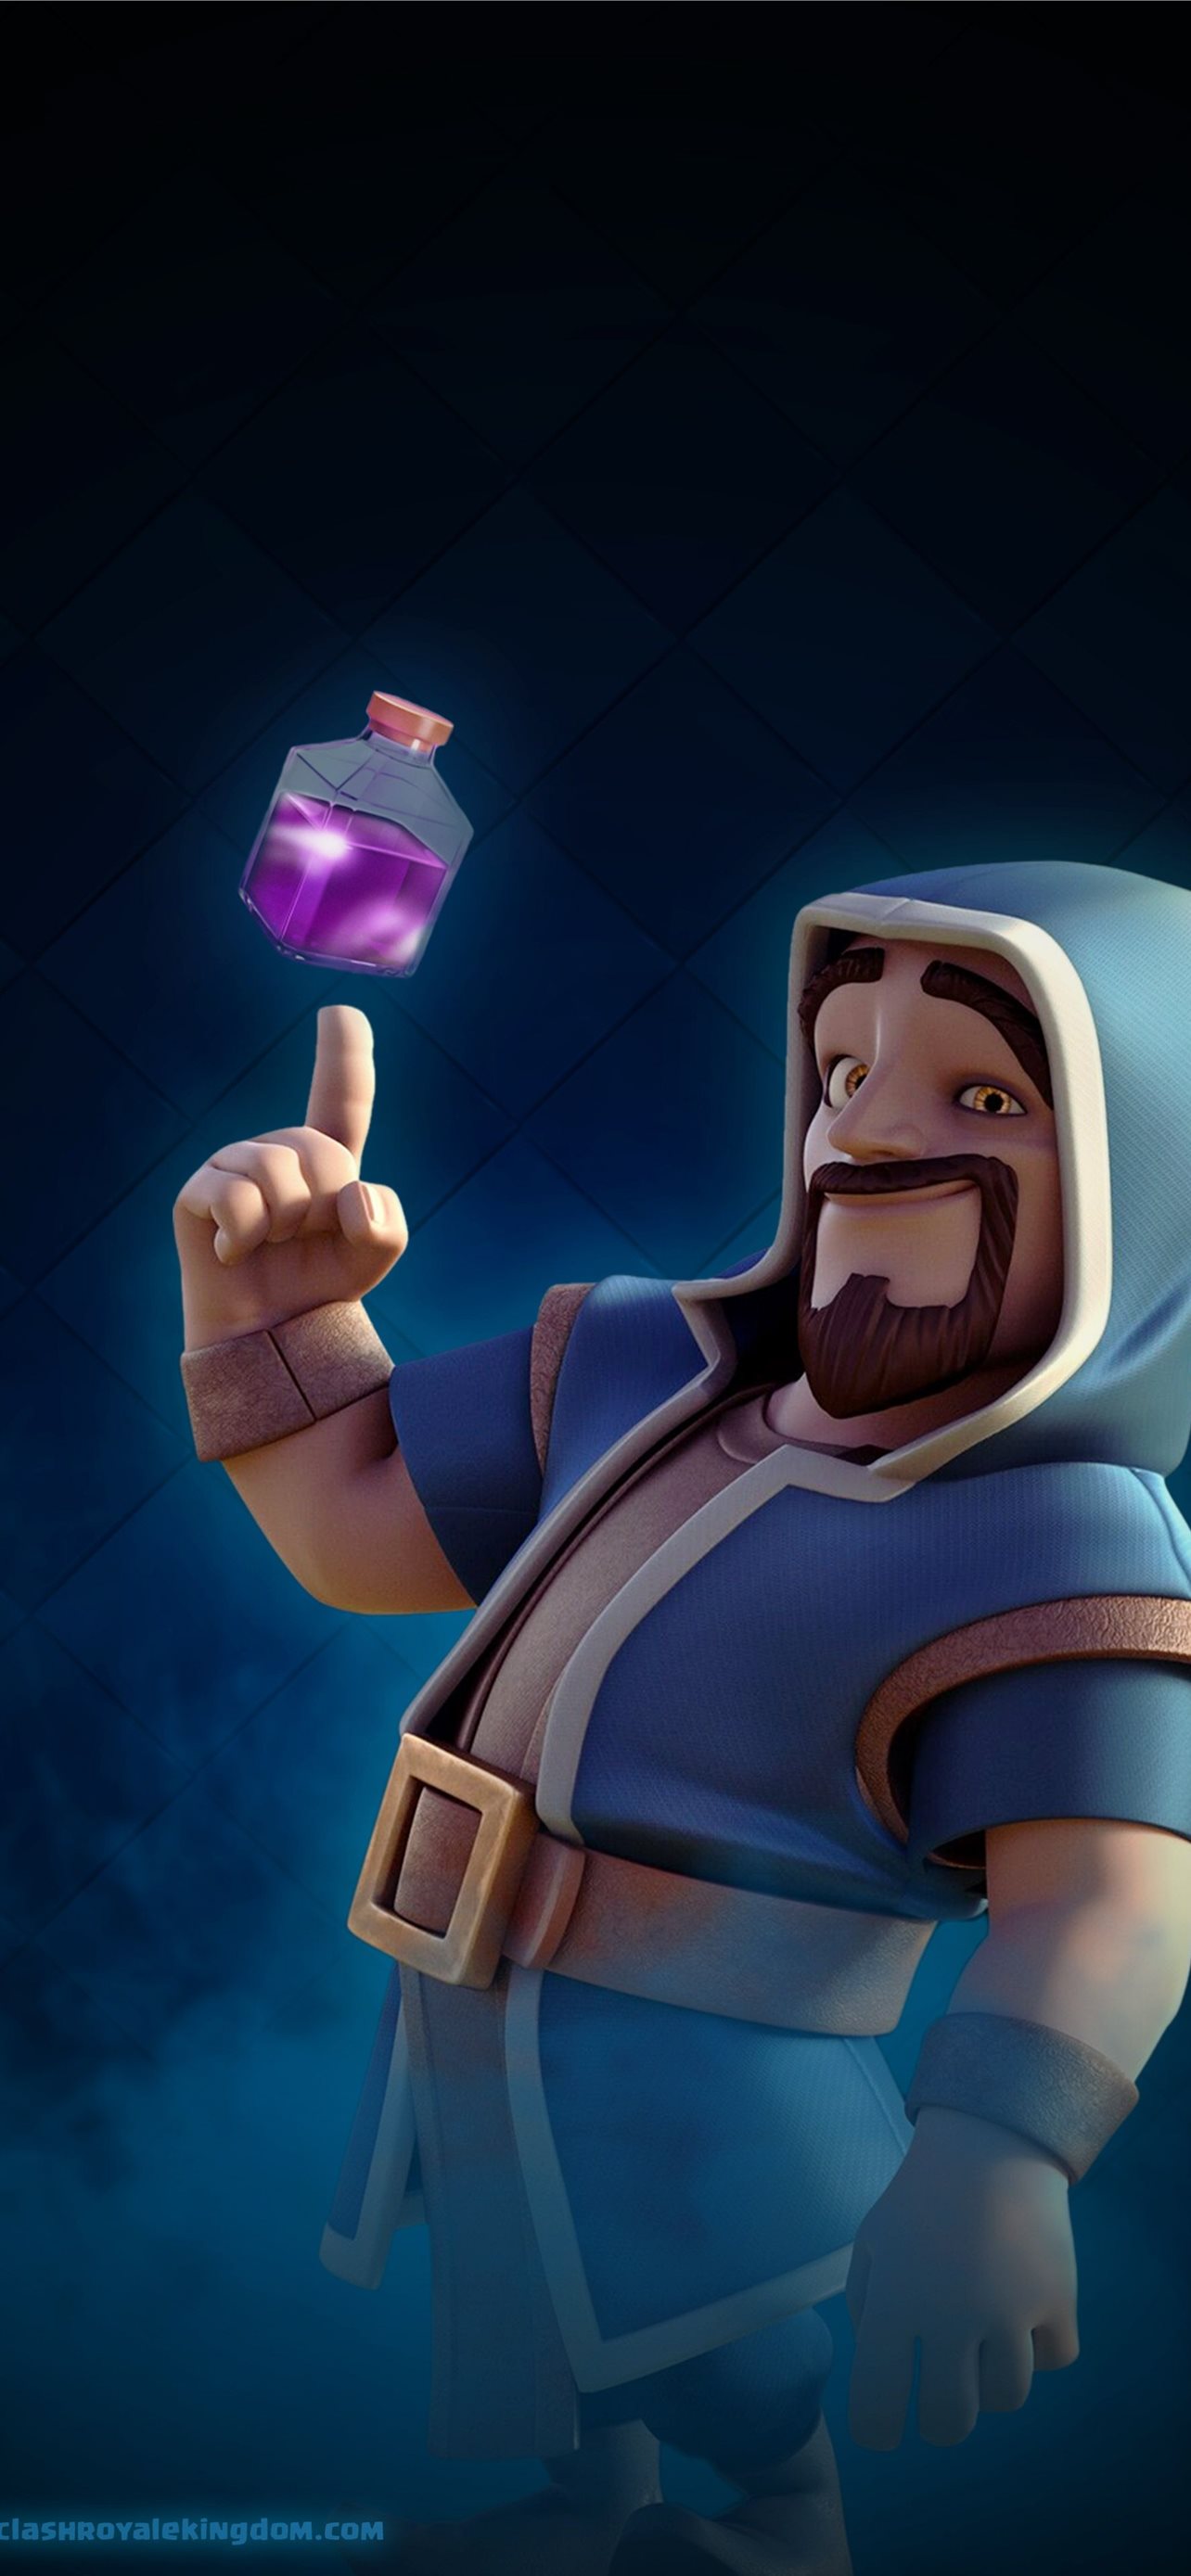 Download Clash Of Clans wallpapers for mobile phone free Clash Of Clans  HD pictures